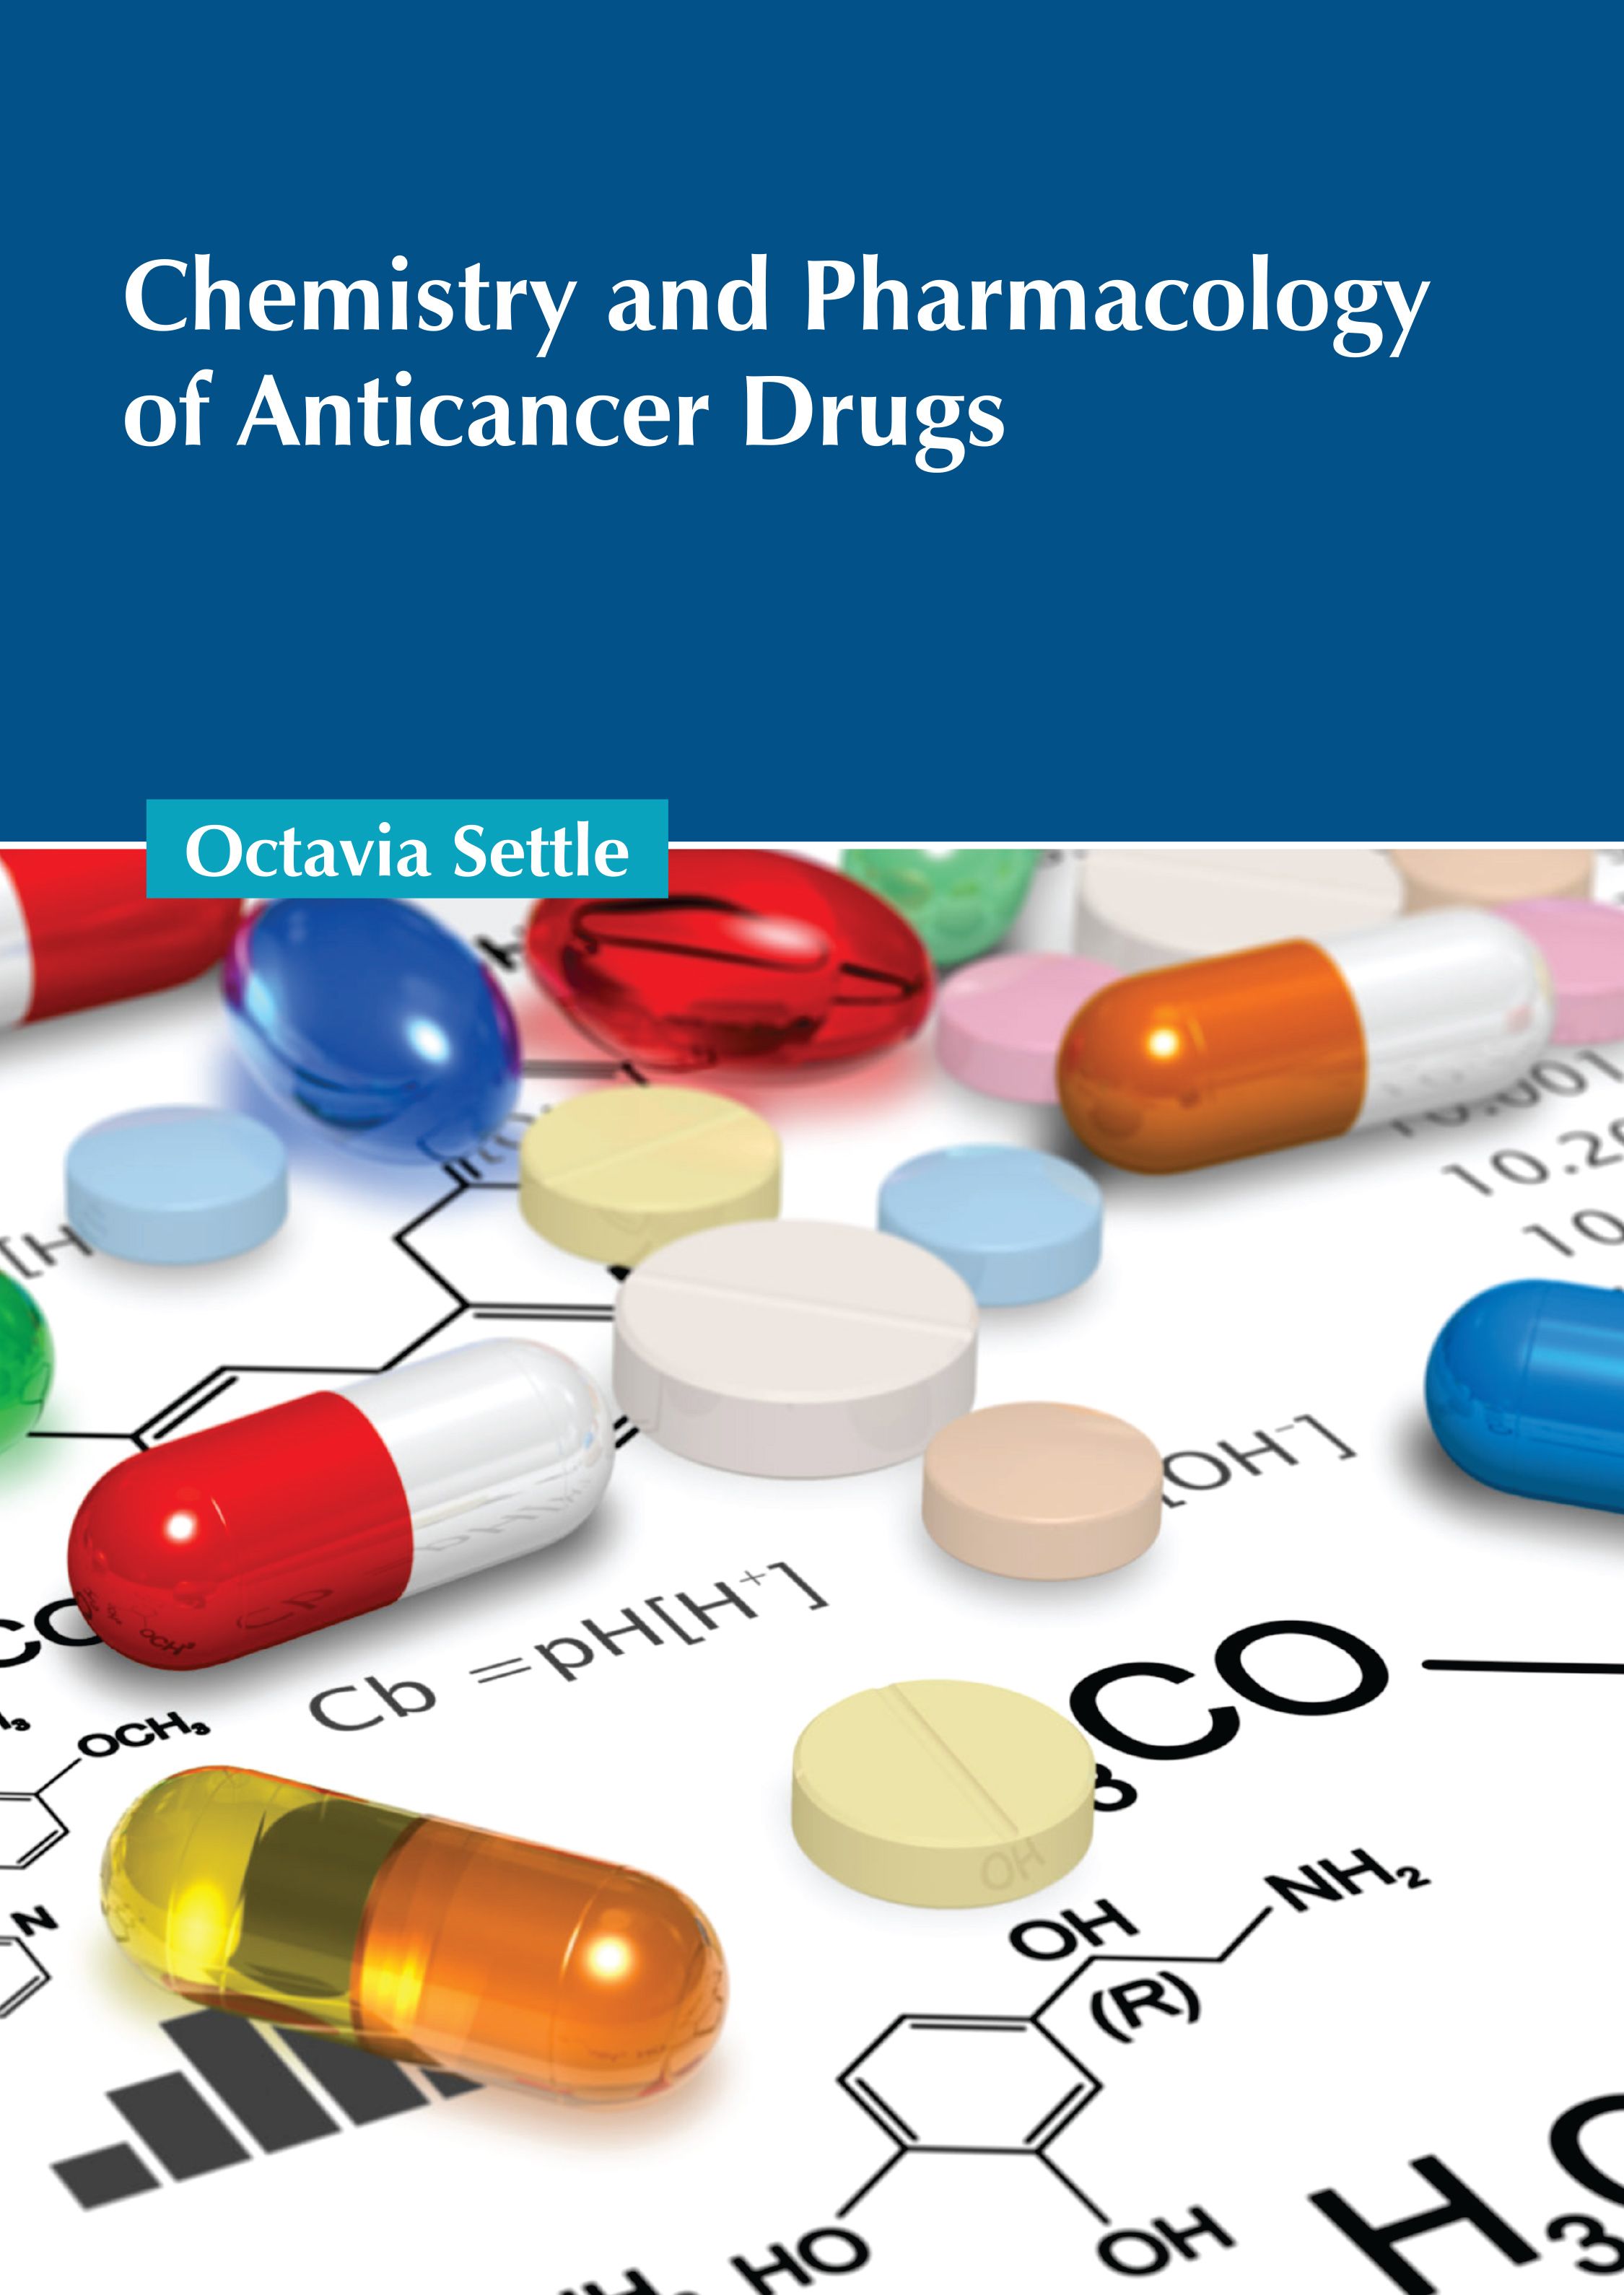 CHEMISTRY AND PHARMACOLOGY OF ANTICANCER DRUGS